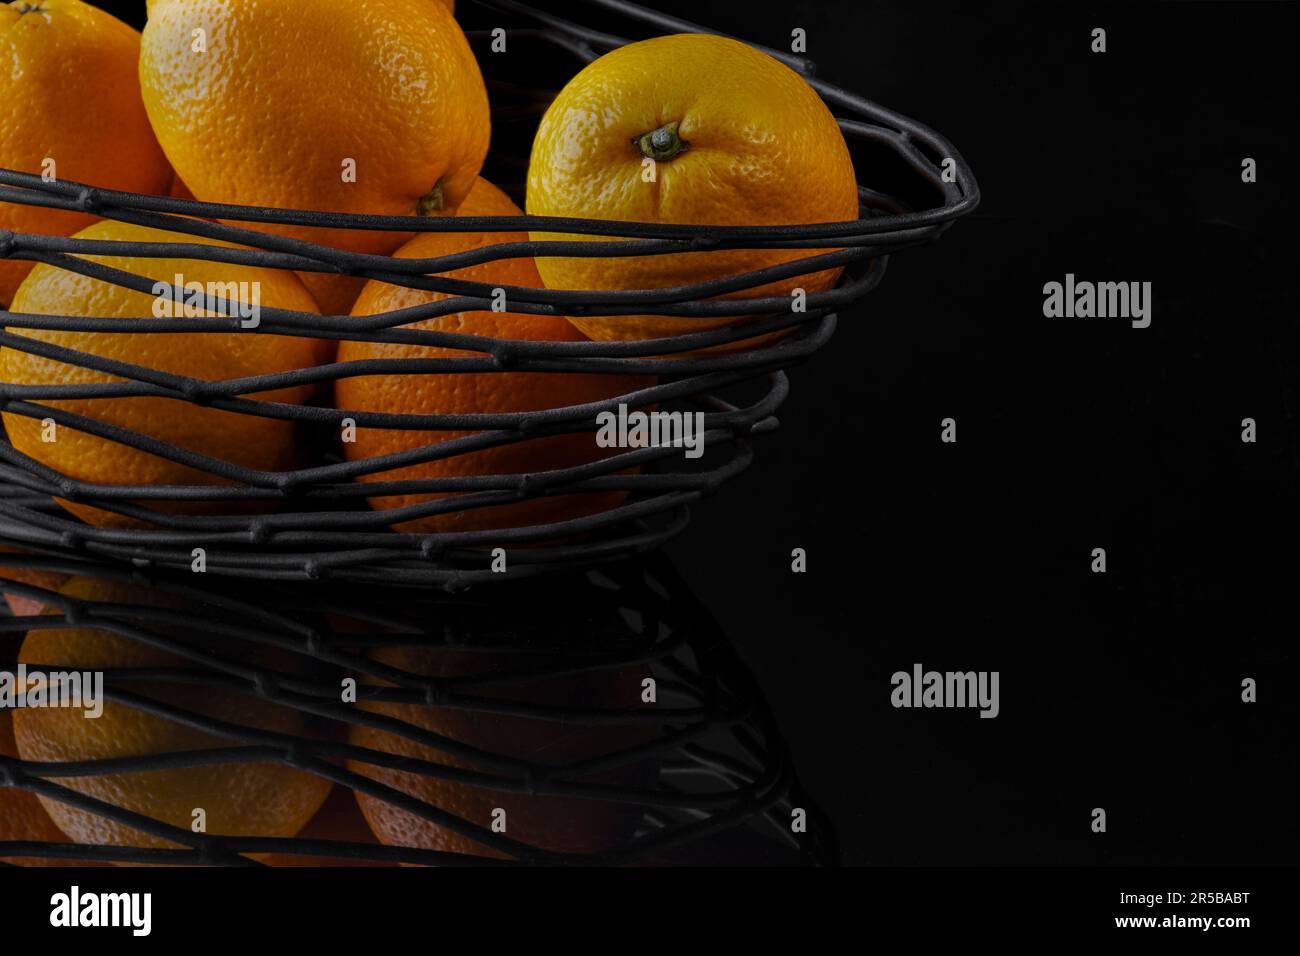 a black wire basket with fresh oranges on mirrored black background. Stock Photo